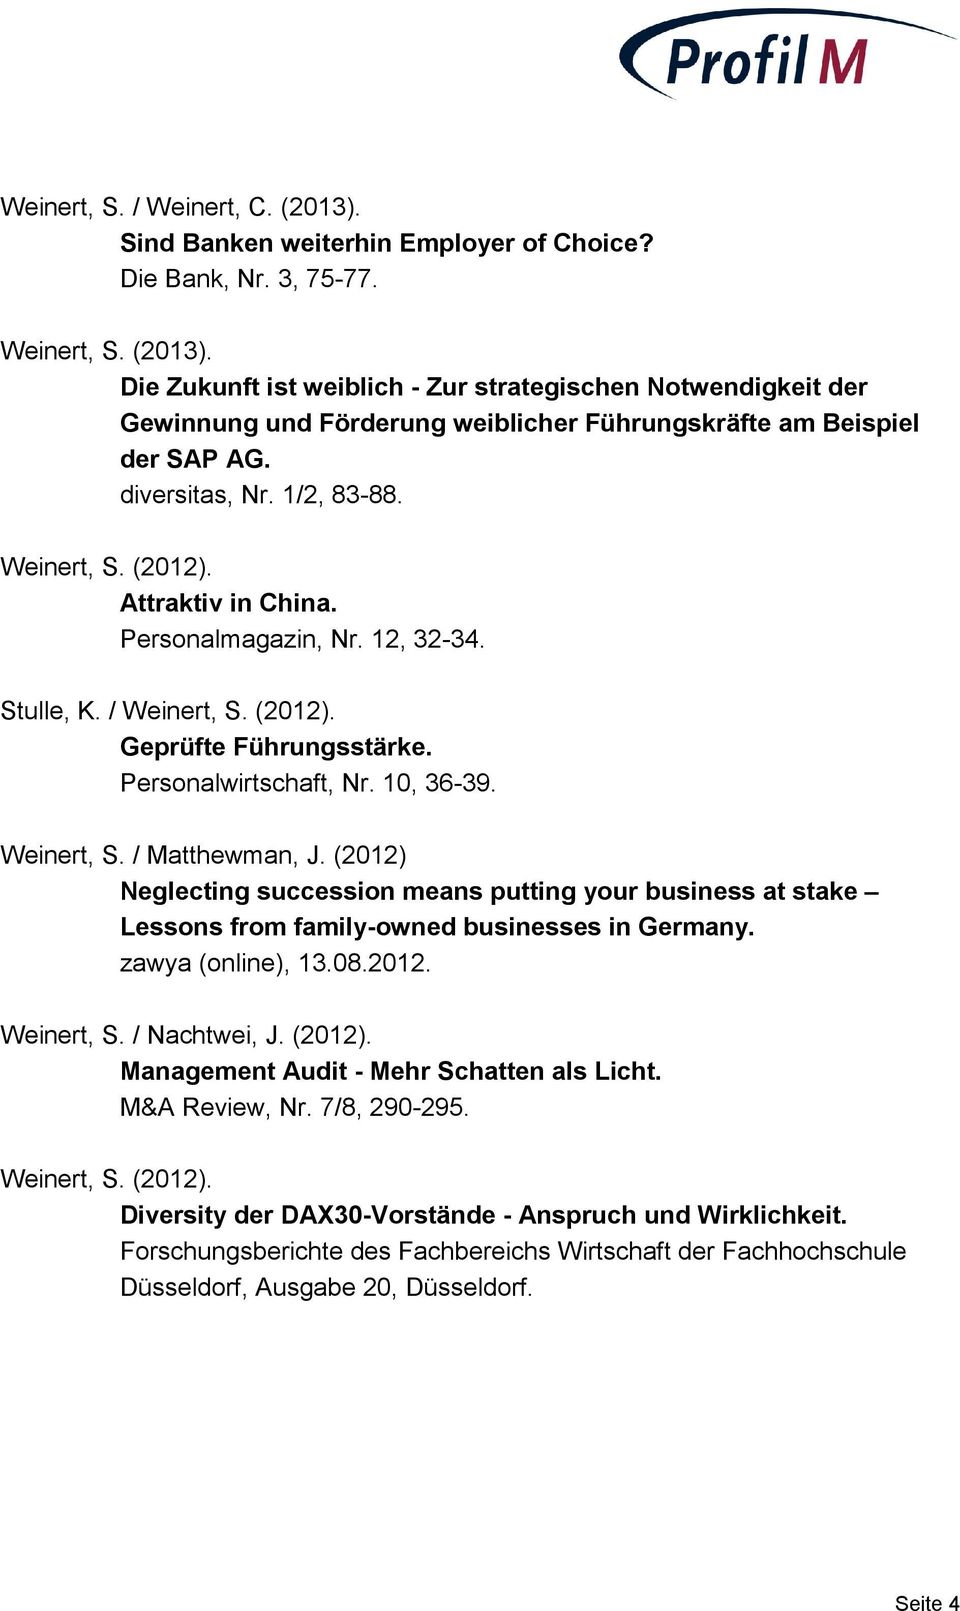 Weinert, S. / Matthewman, J. (2012) Neglecting succession means putting your business at stake Lessons from family-owned businesses in Germany. zawya (online), 13.08.2012. Weinert, S. / Nachtwei, J.